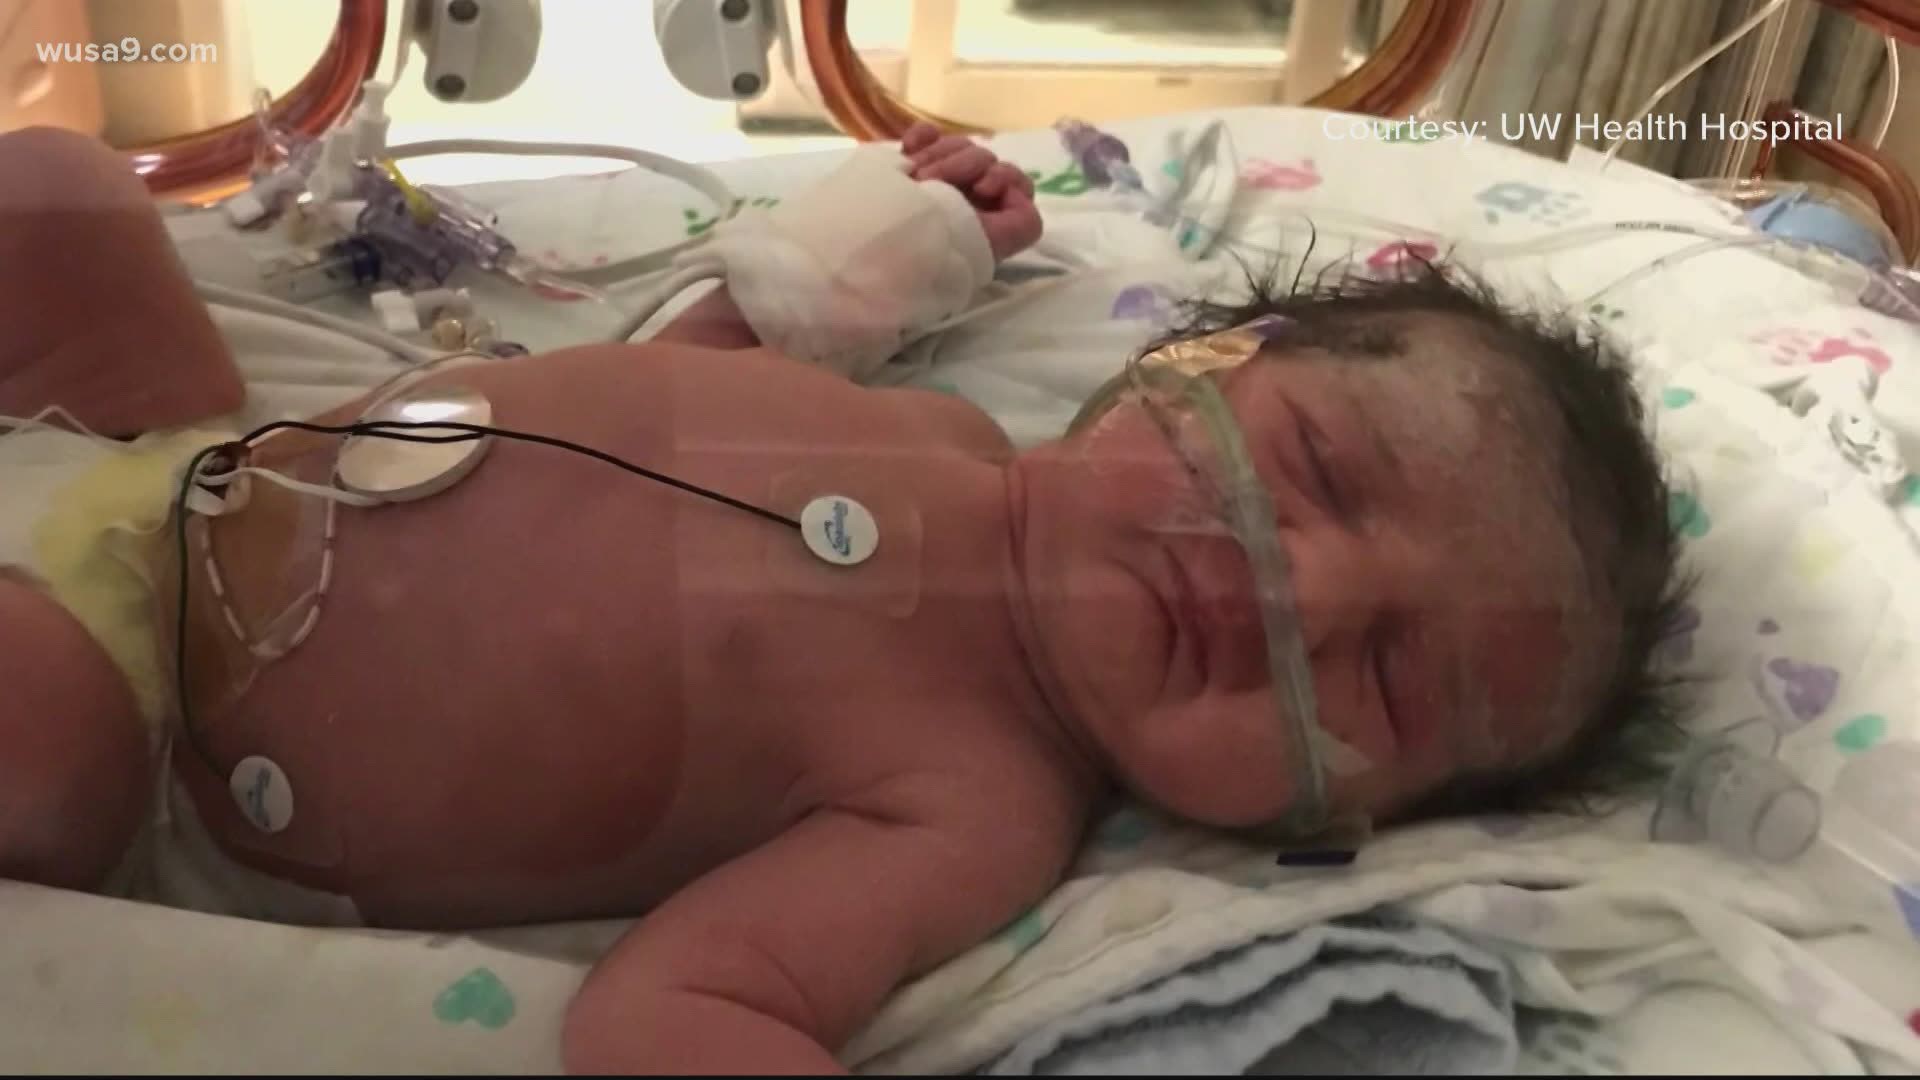 The mom was in a medically induced coma when her daughter was born.